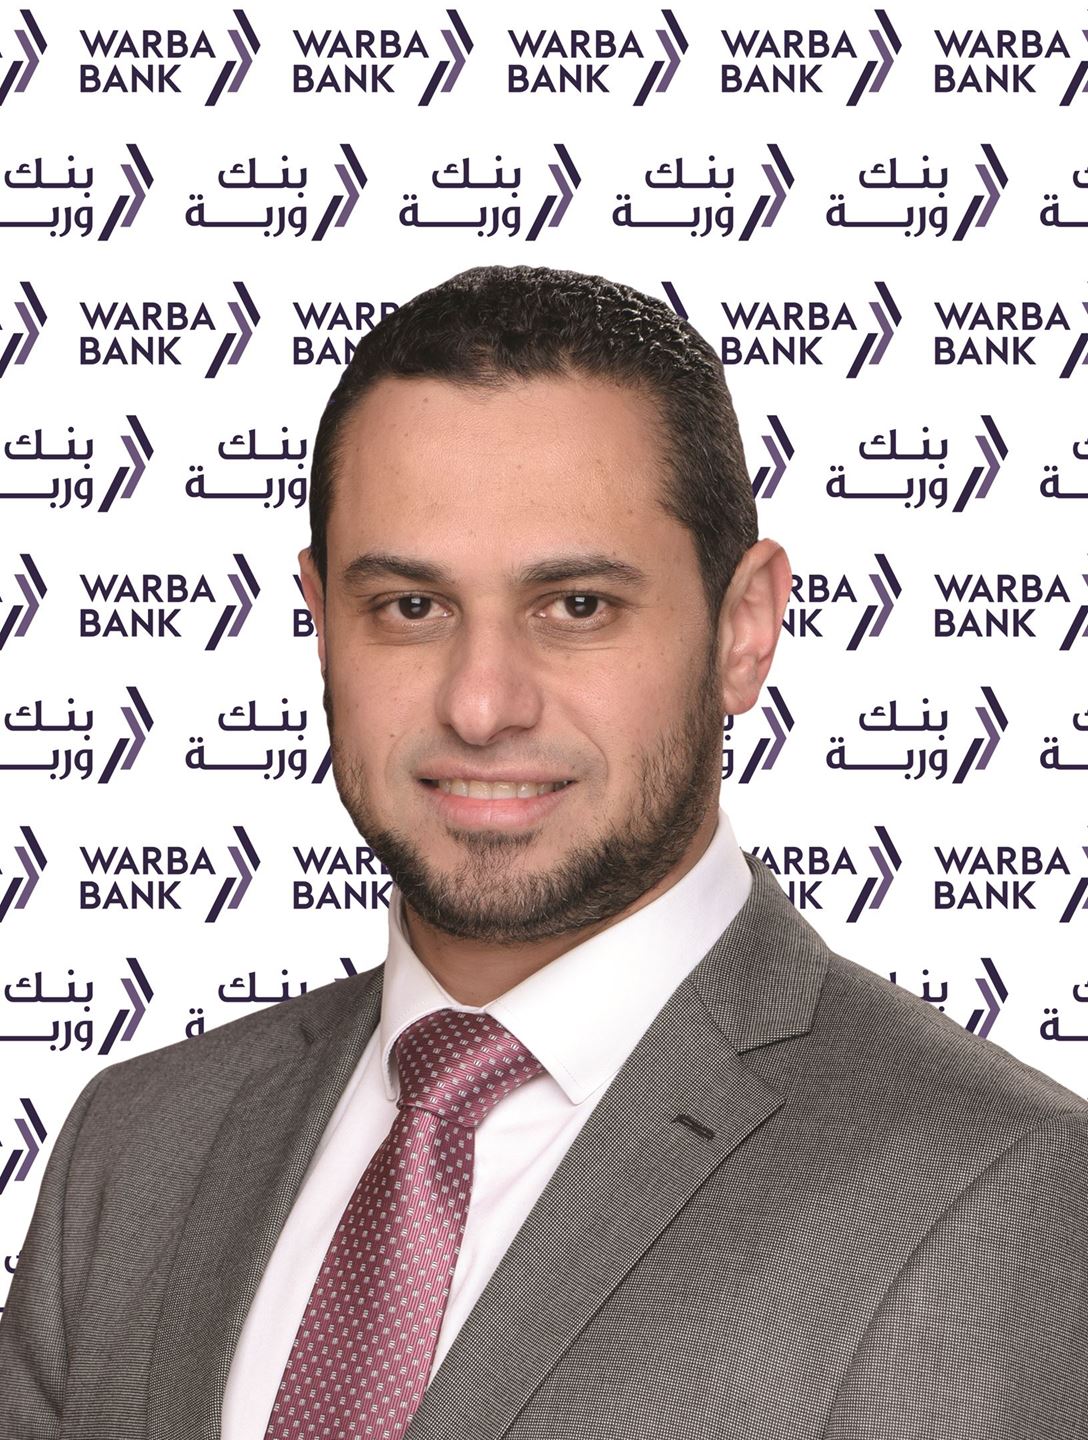 Warba Bank Launches "Investor's Relations" Platform